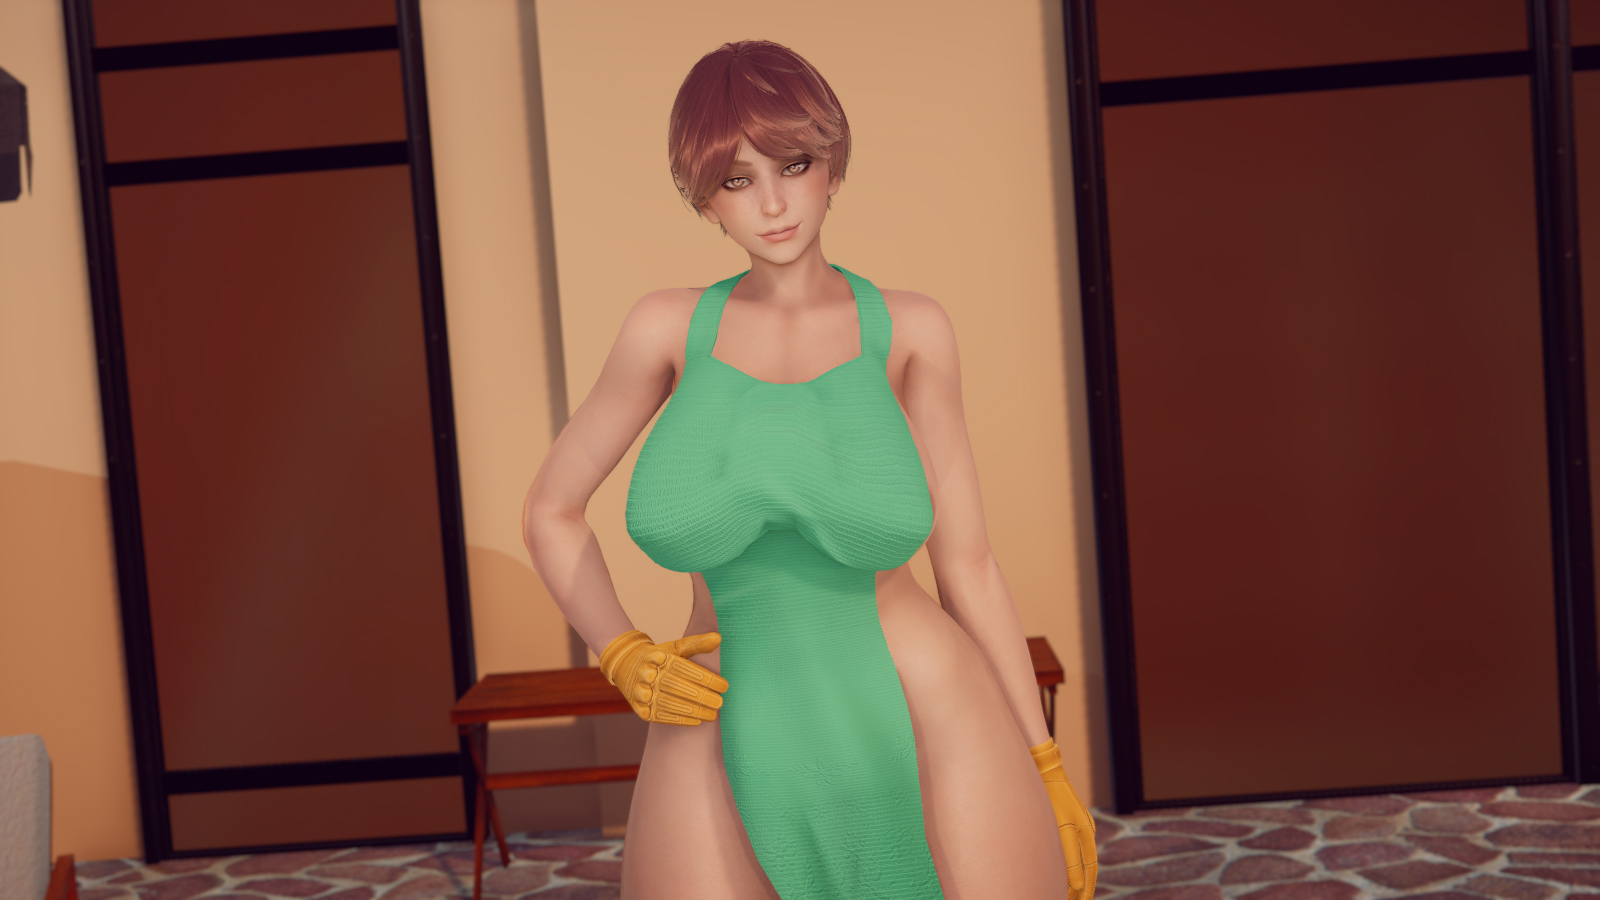 Milfy Day v0.7.3 MOD APK -  - Android & iOS MODs, Mobile  Games & Apps